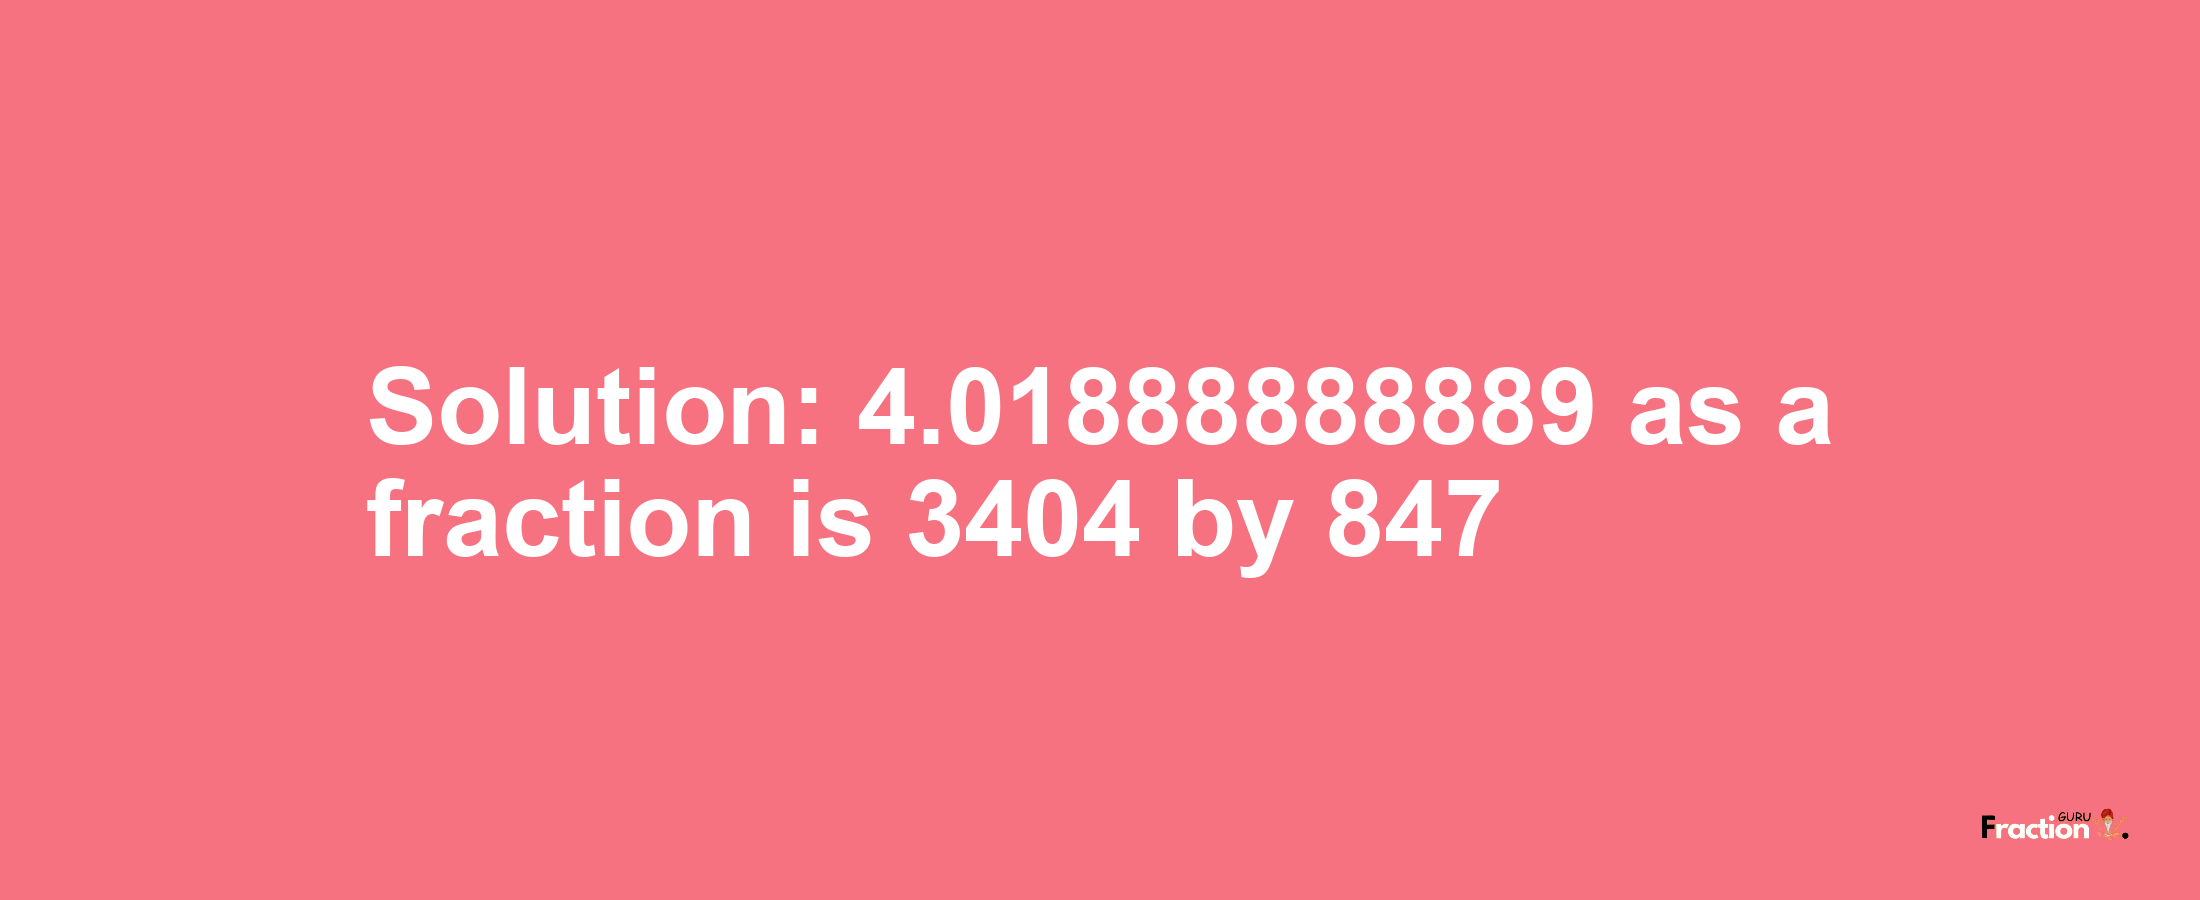 Solution:4.01888888889 as a fraction is 3404/847